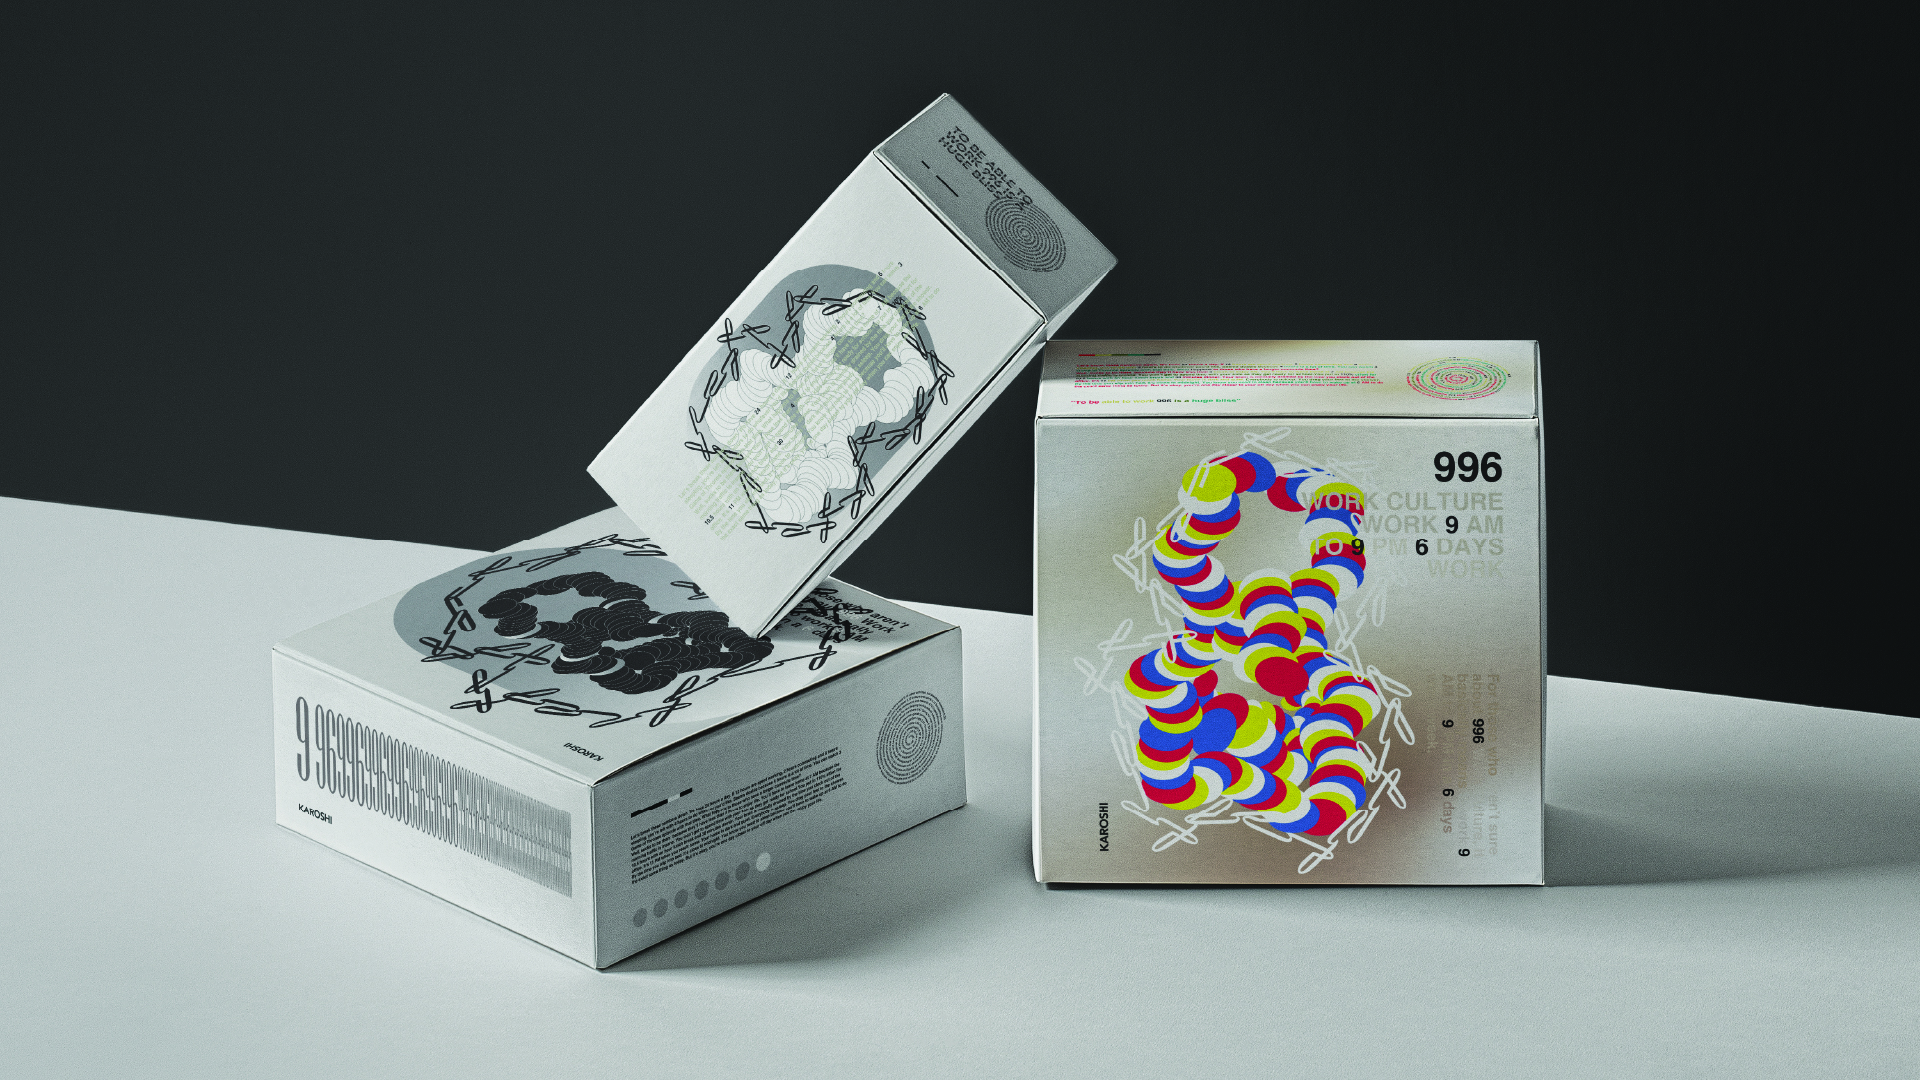 <i>Second packaging design on 996 working culture</i>